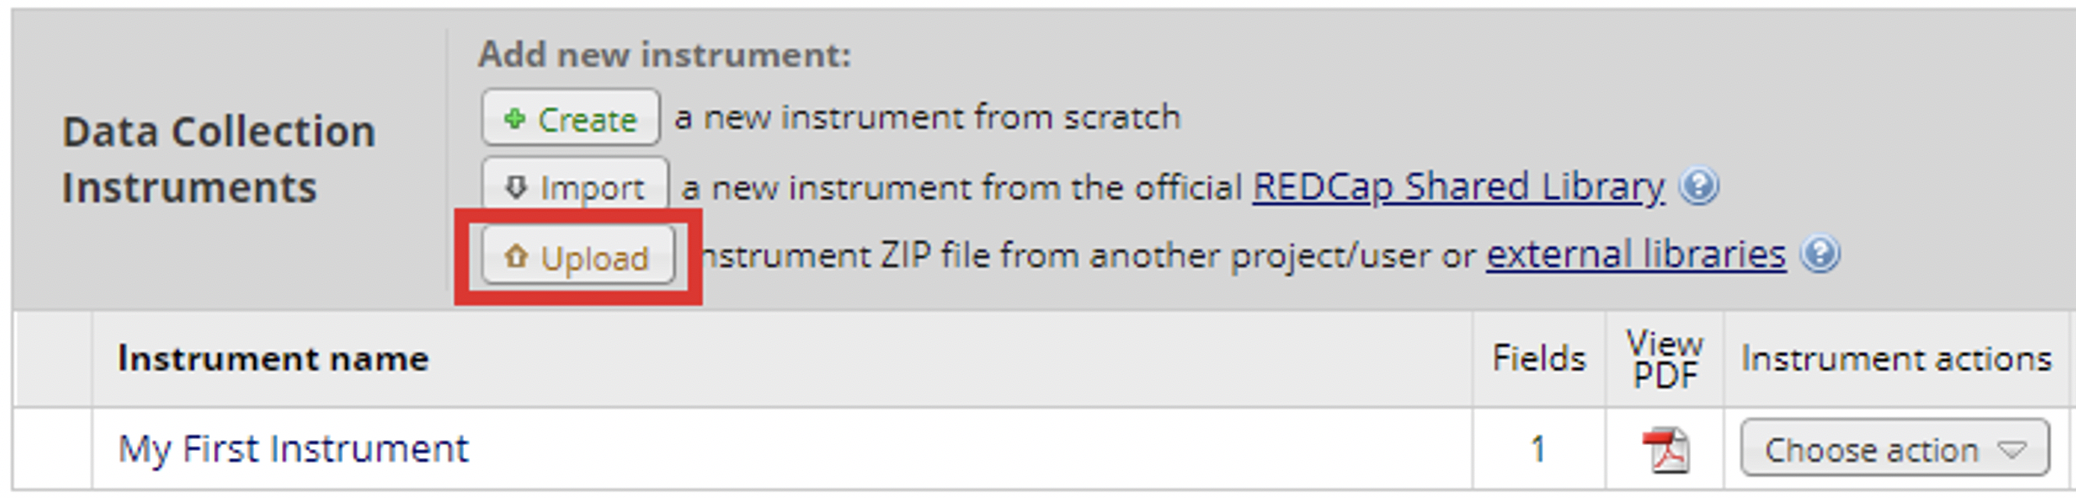 'Data Collection Instruments' screenshot with 'Upload' highlighted in 'Add New Instrument' options.